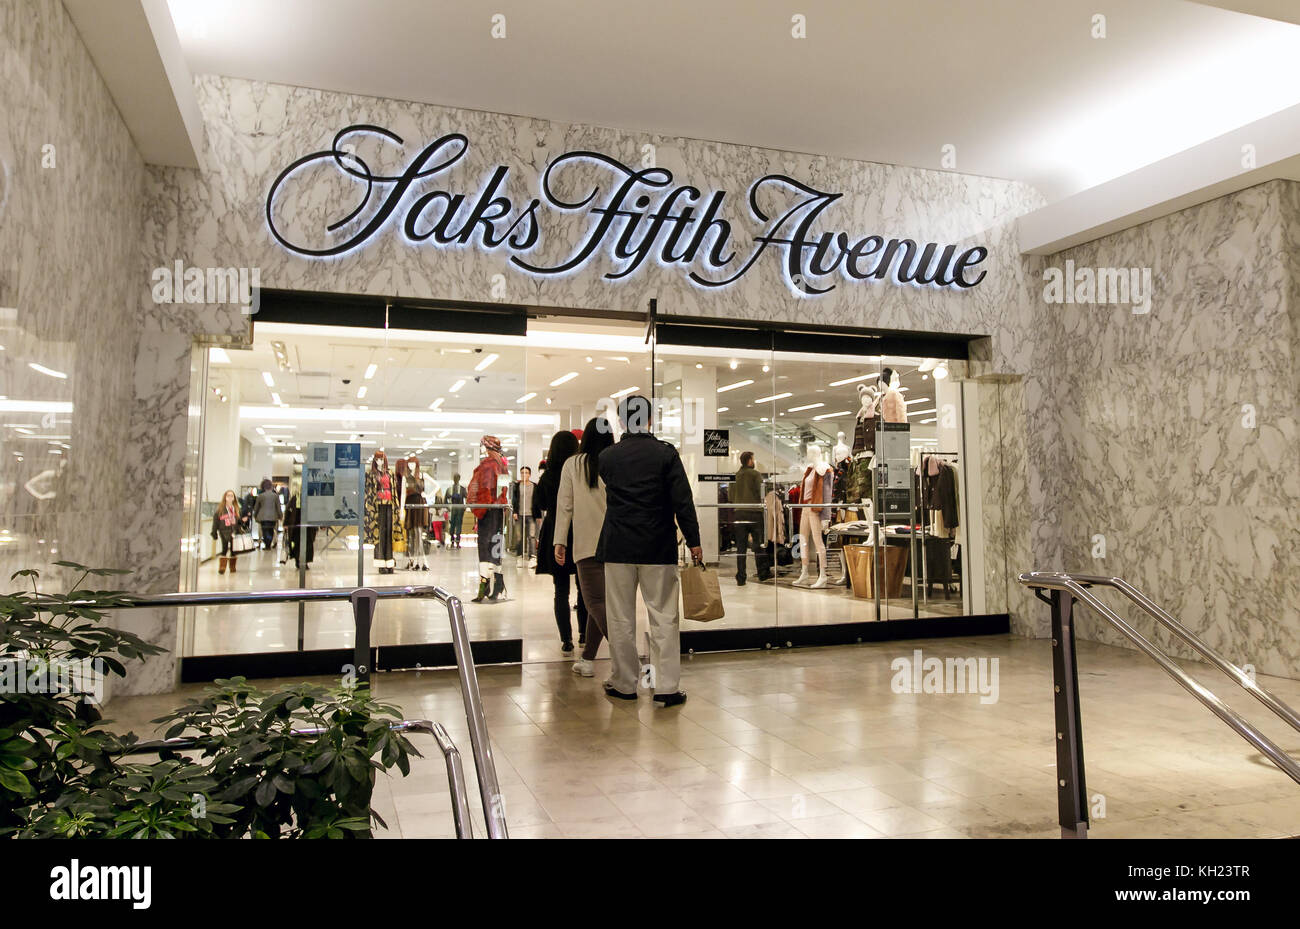 Saks fifth avenue department store entrance sign hi-res stock photography  and images - Alamy